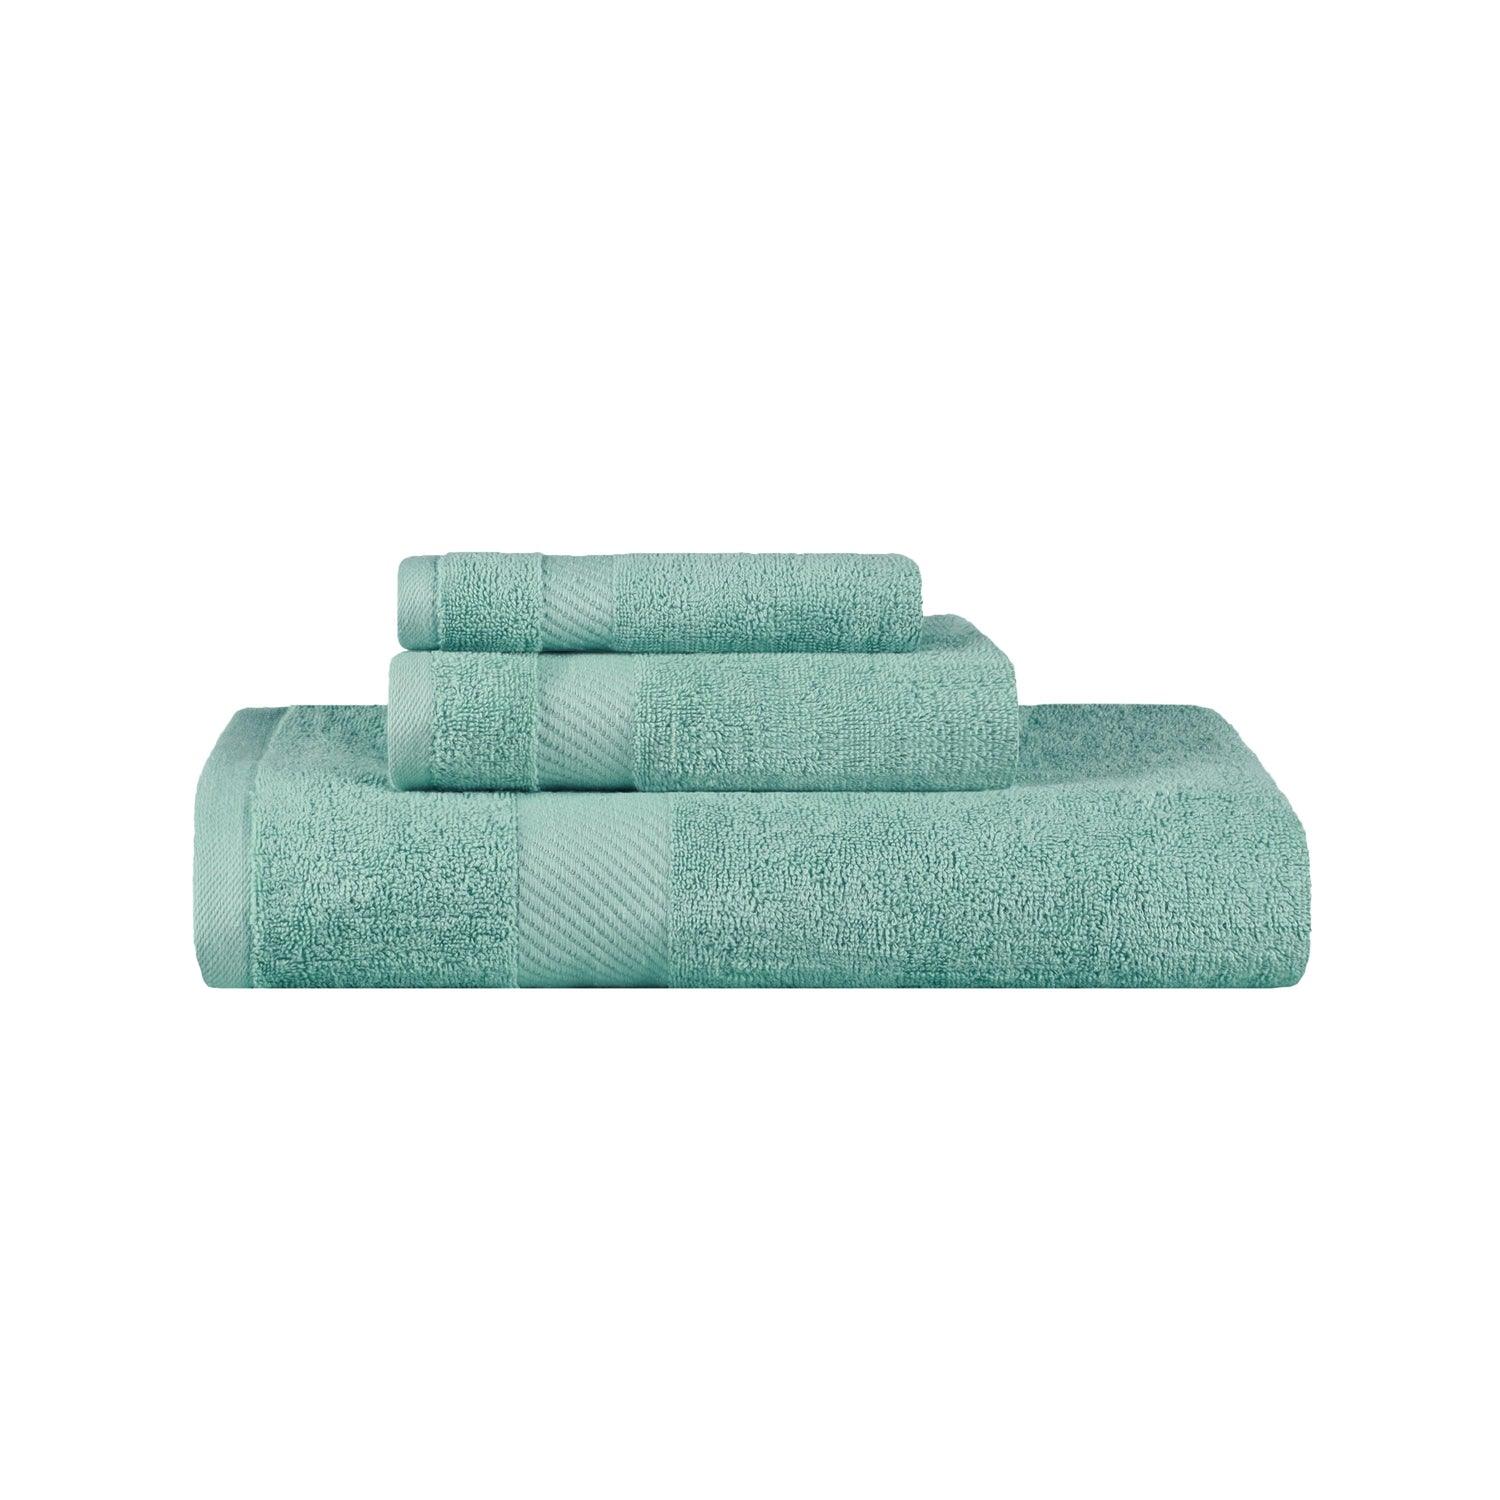 Kendell Egyptian Cotton Quick Drying 3-Piece Towel Set - Sea Foam